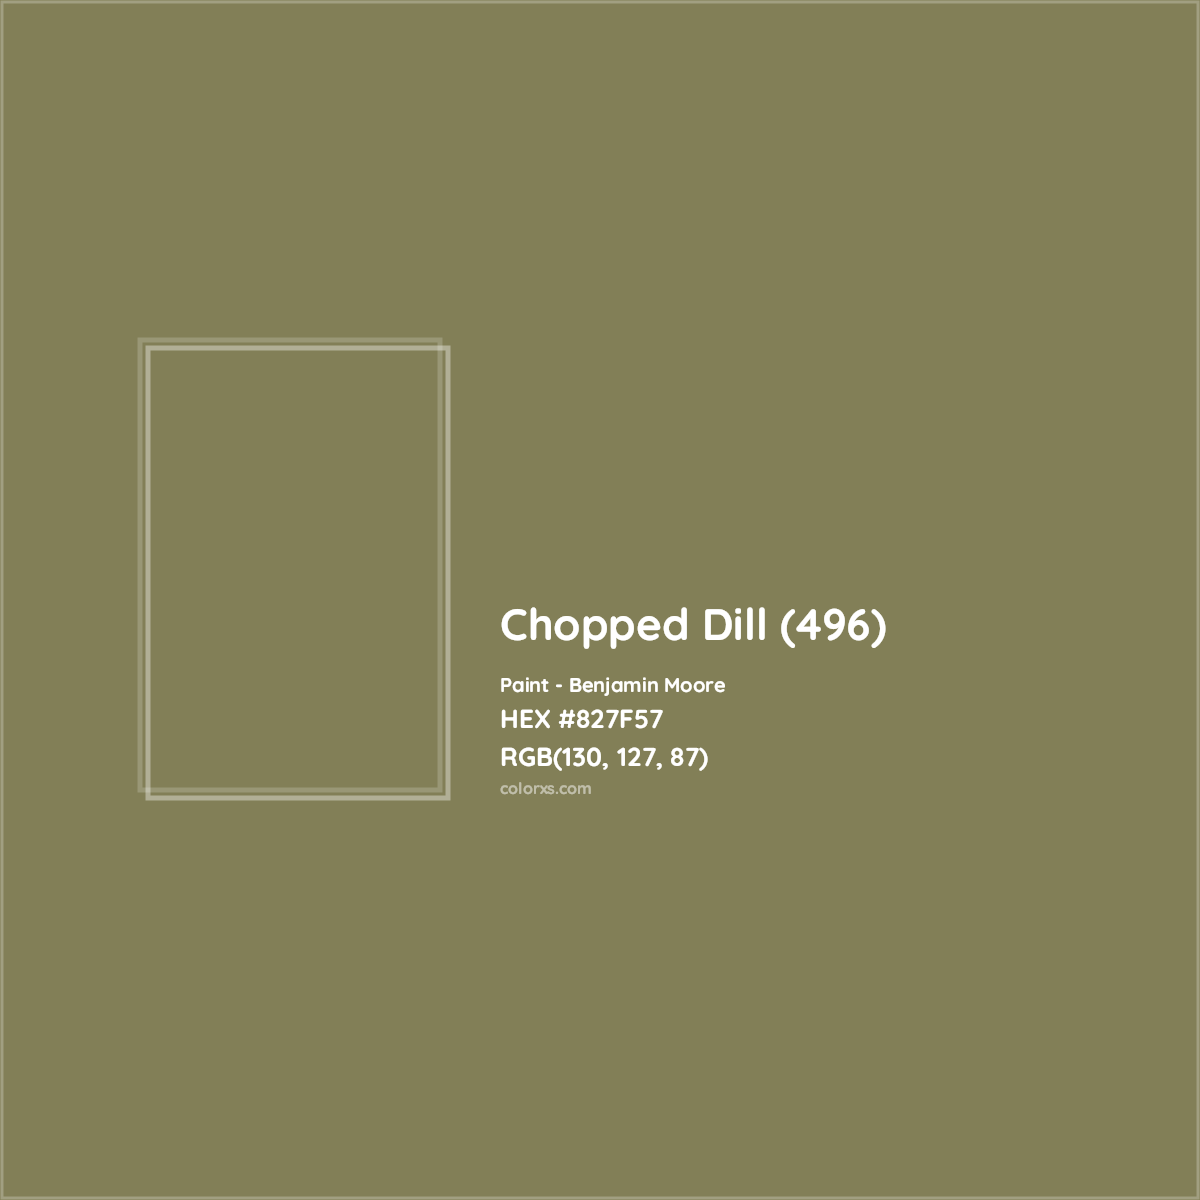 HEX #827F57 Chopped Dill (496) Paint Benjamin Moore - Color Code